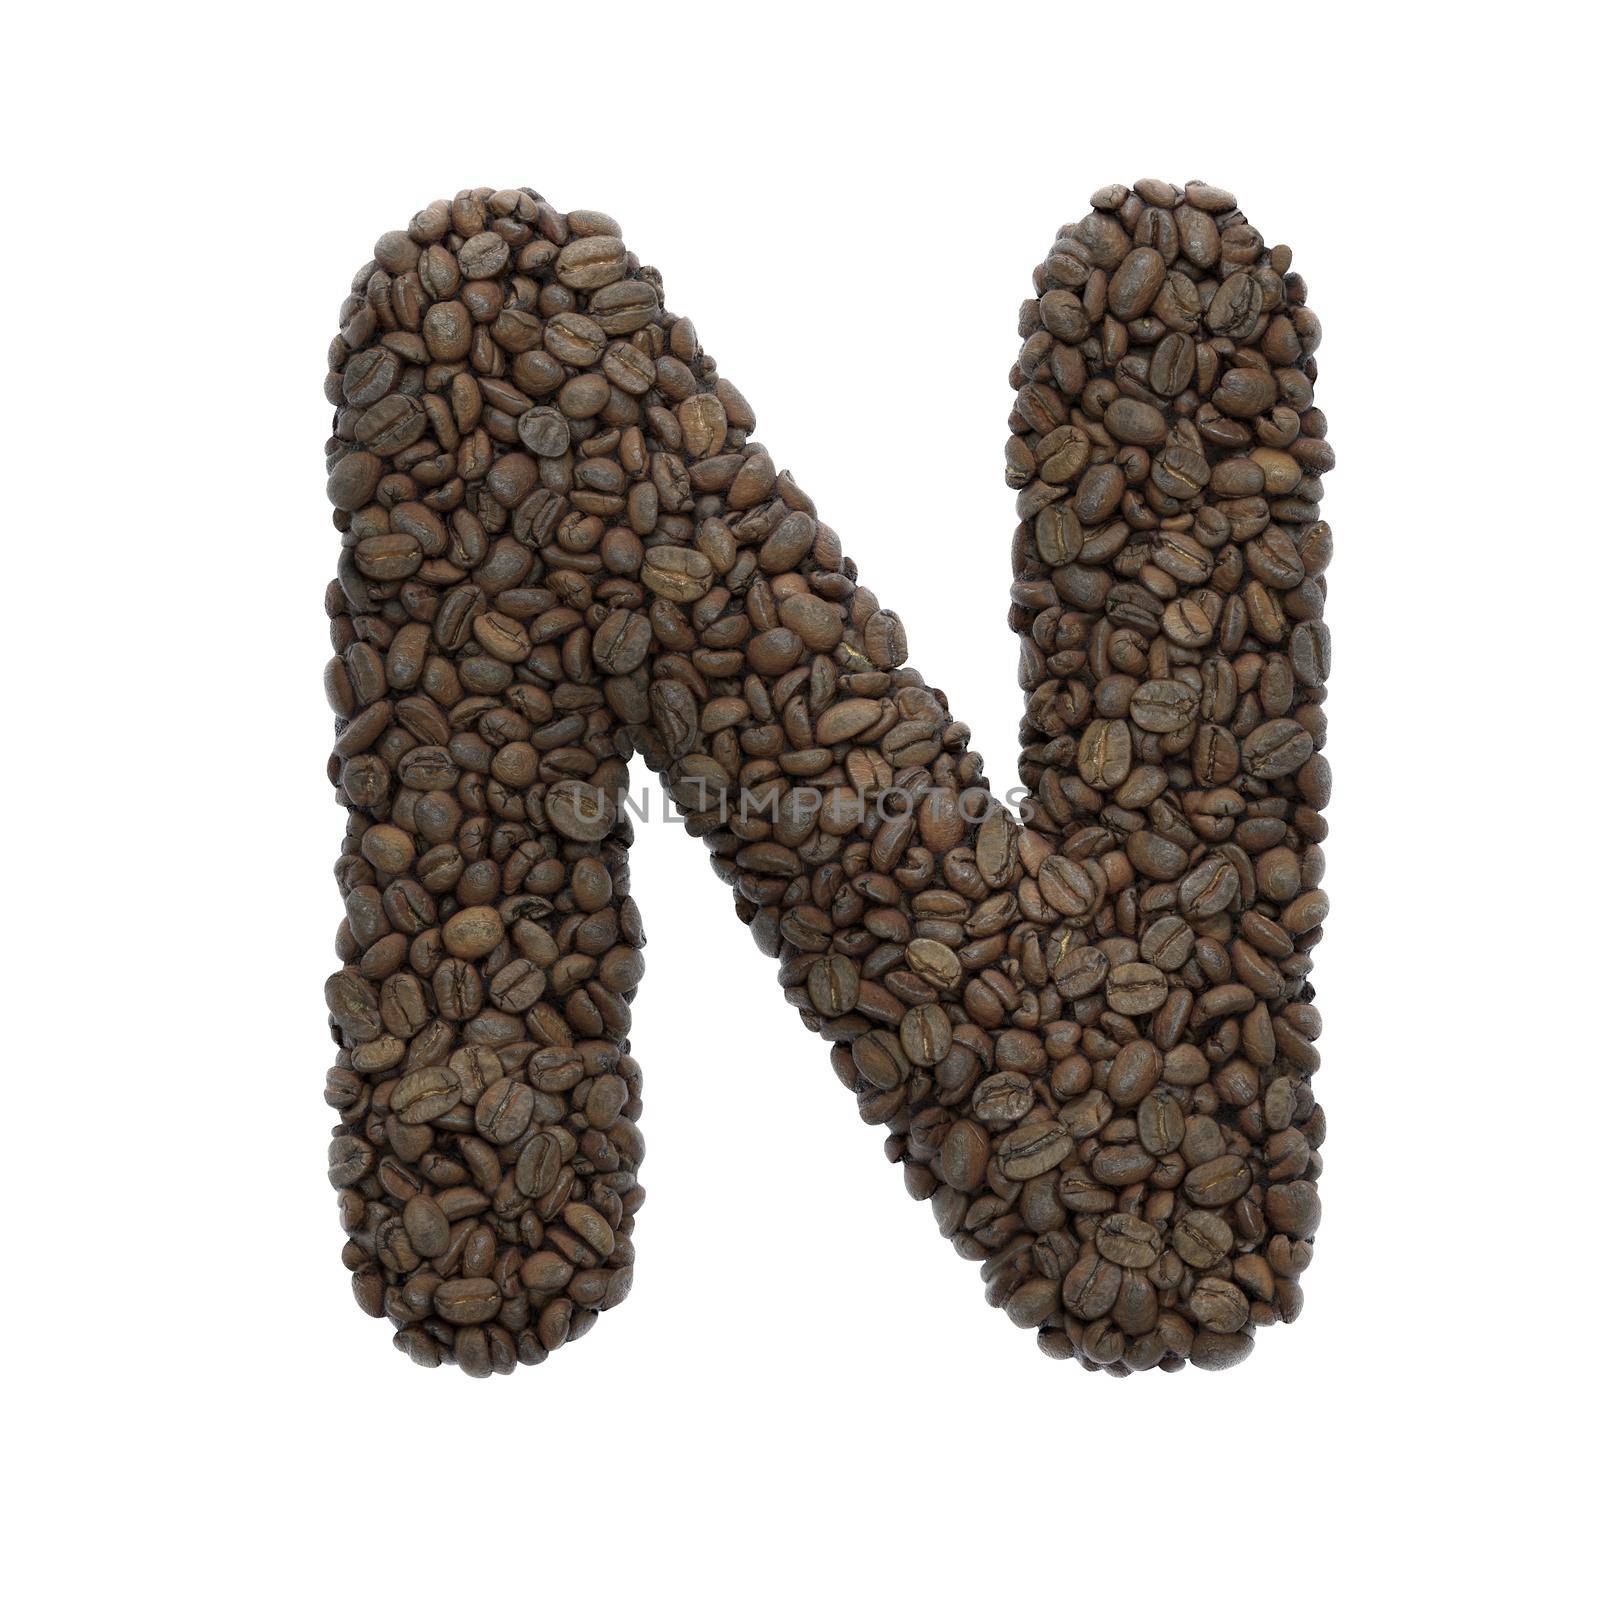 Coffee letter N - Capital 3d roasted beans font - suitable for Coffee, energy or insomnia related subjects by chrisroll